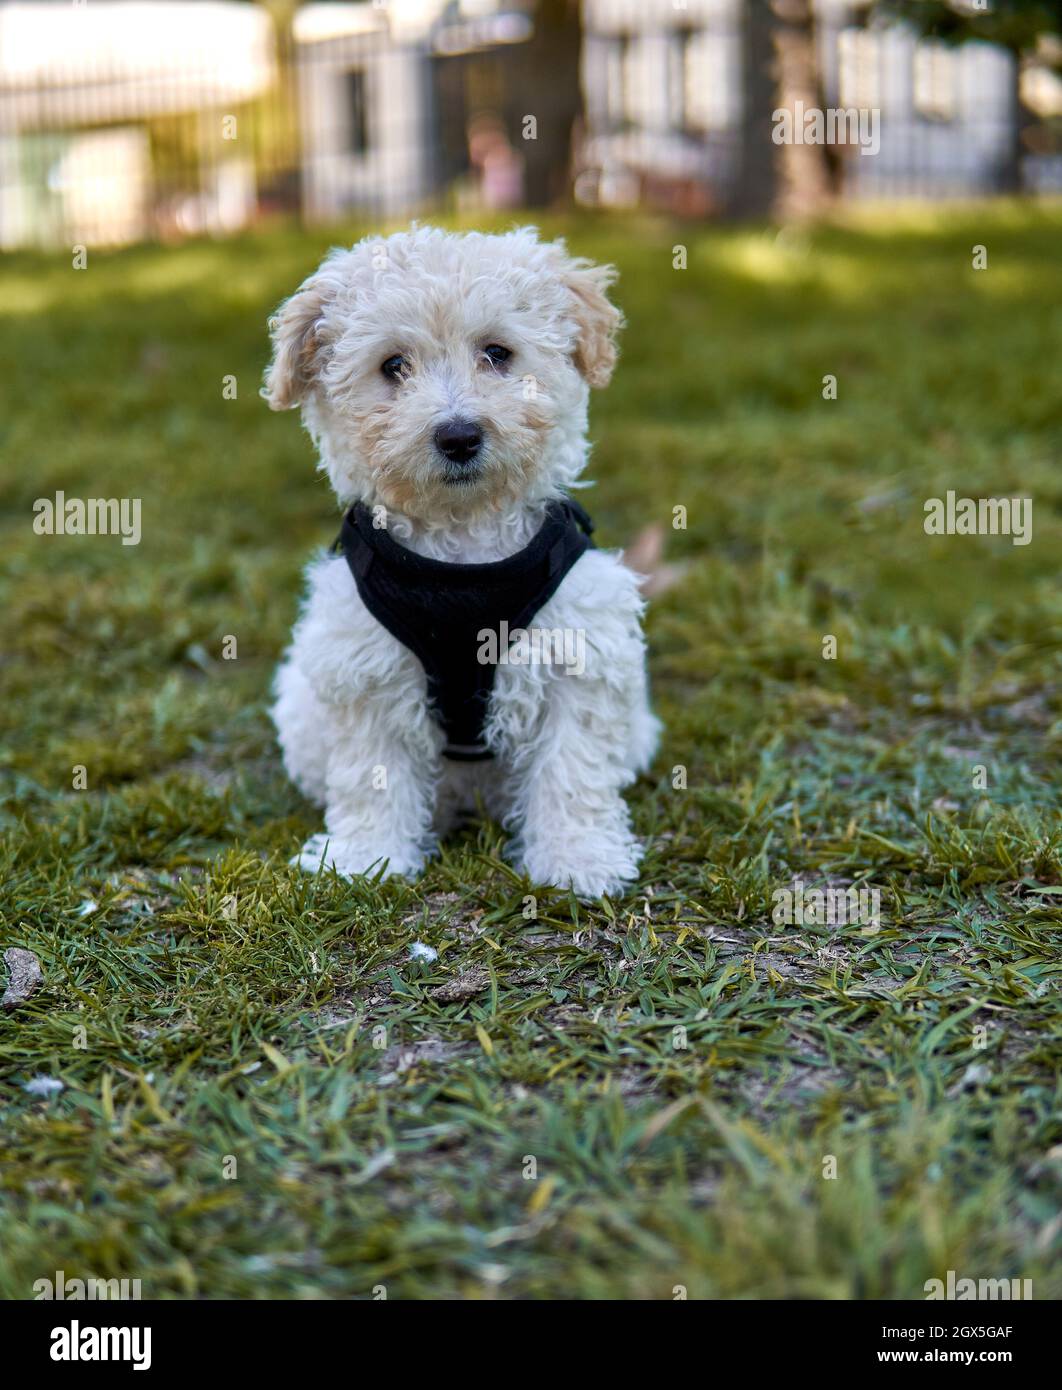 Cute micro poodle puppy sitting on the lawn in a park staring at the camera wearing a black harness. Vertical. Outdoors Stock Photo